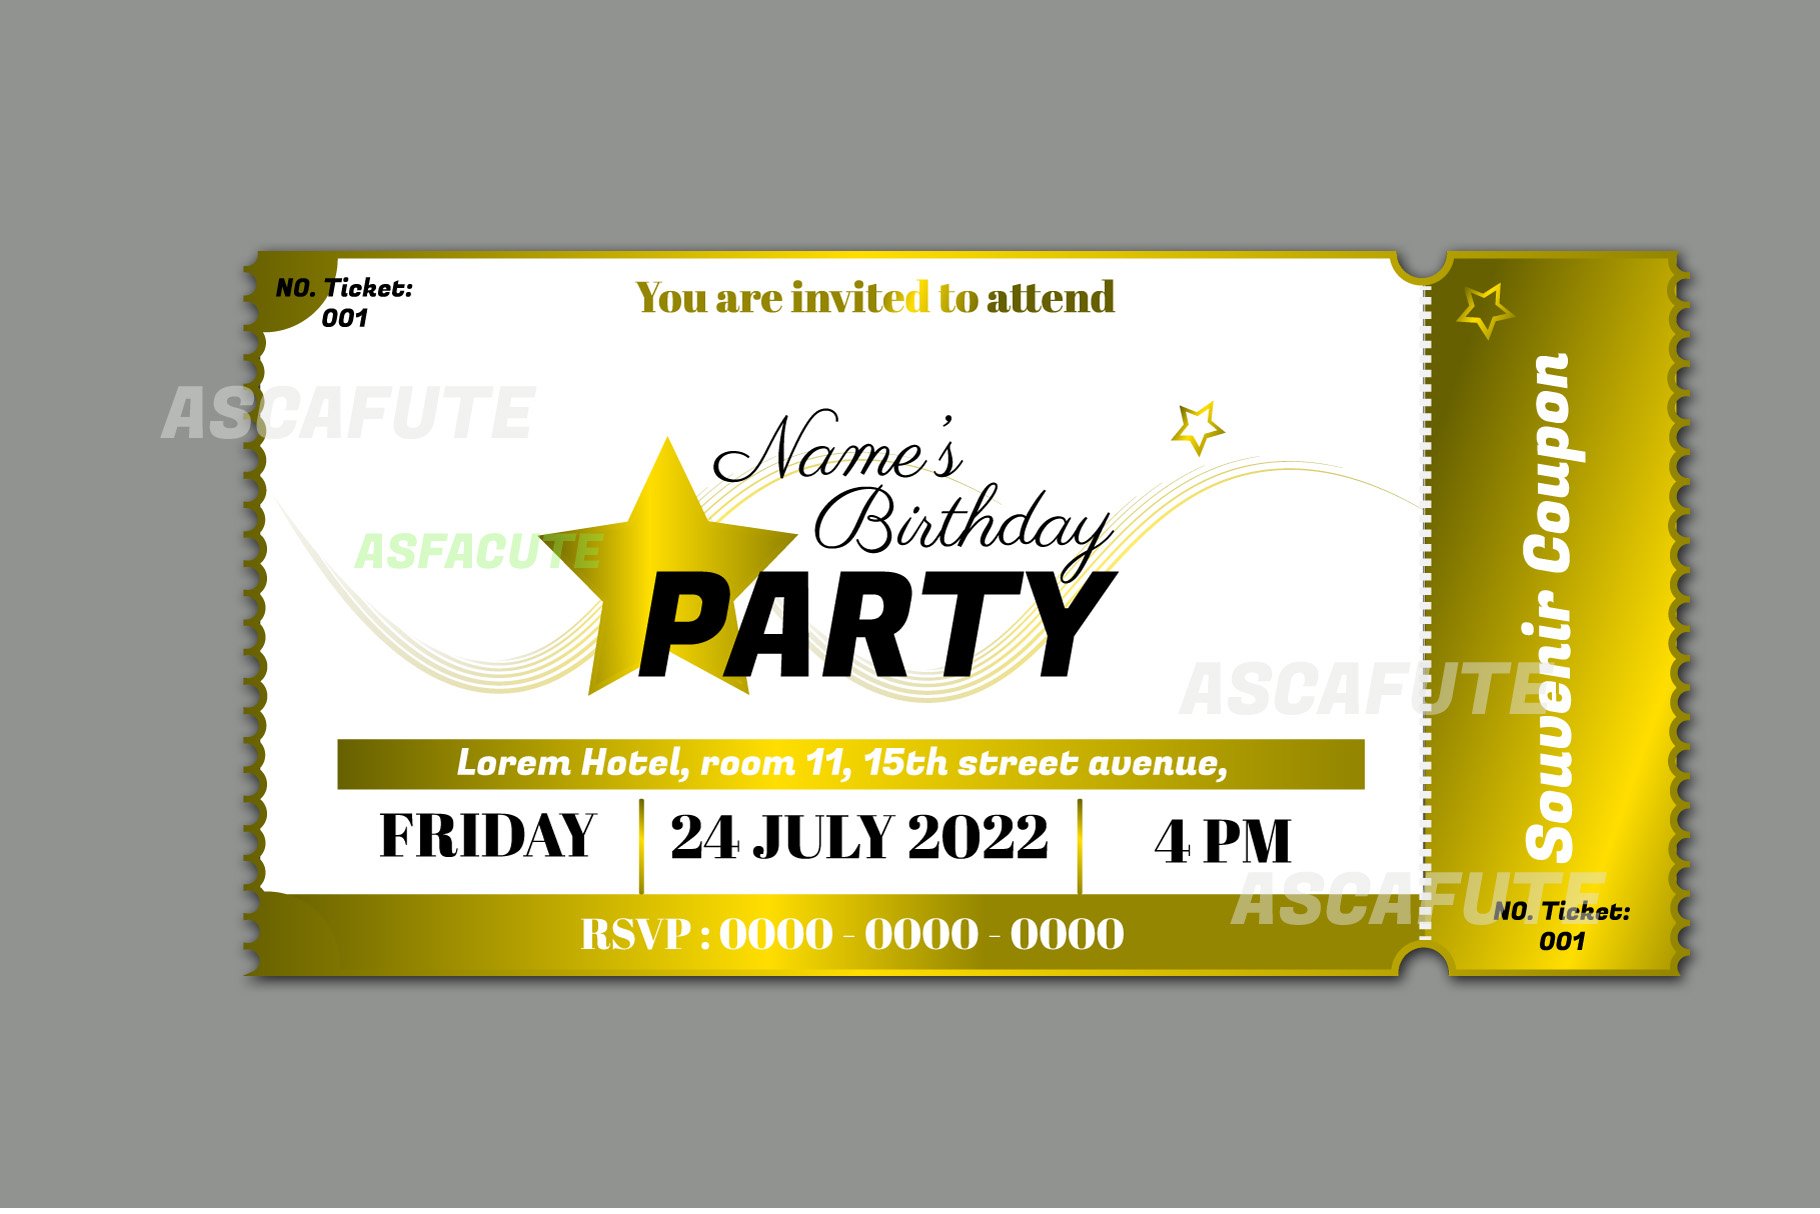 Birthday party invitation template cover image.